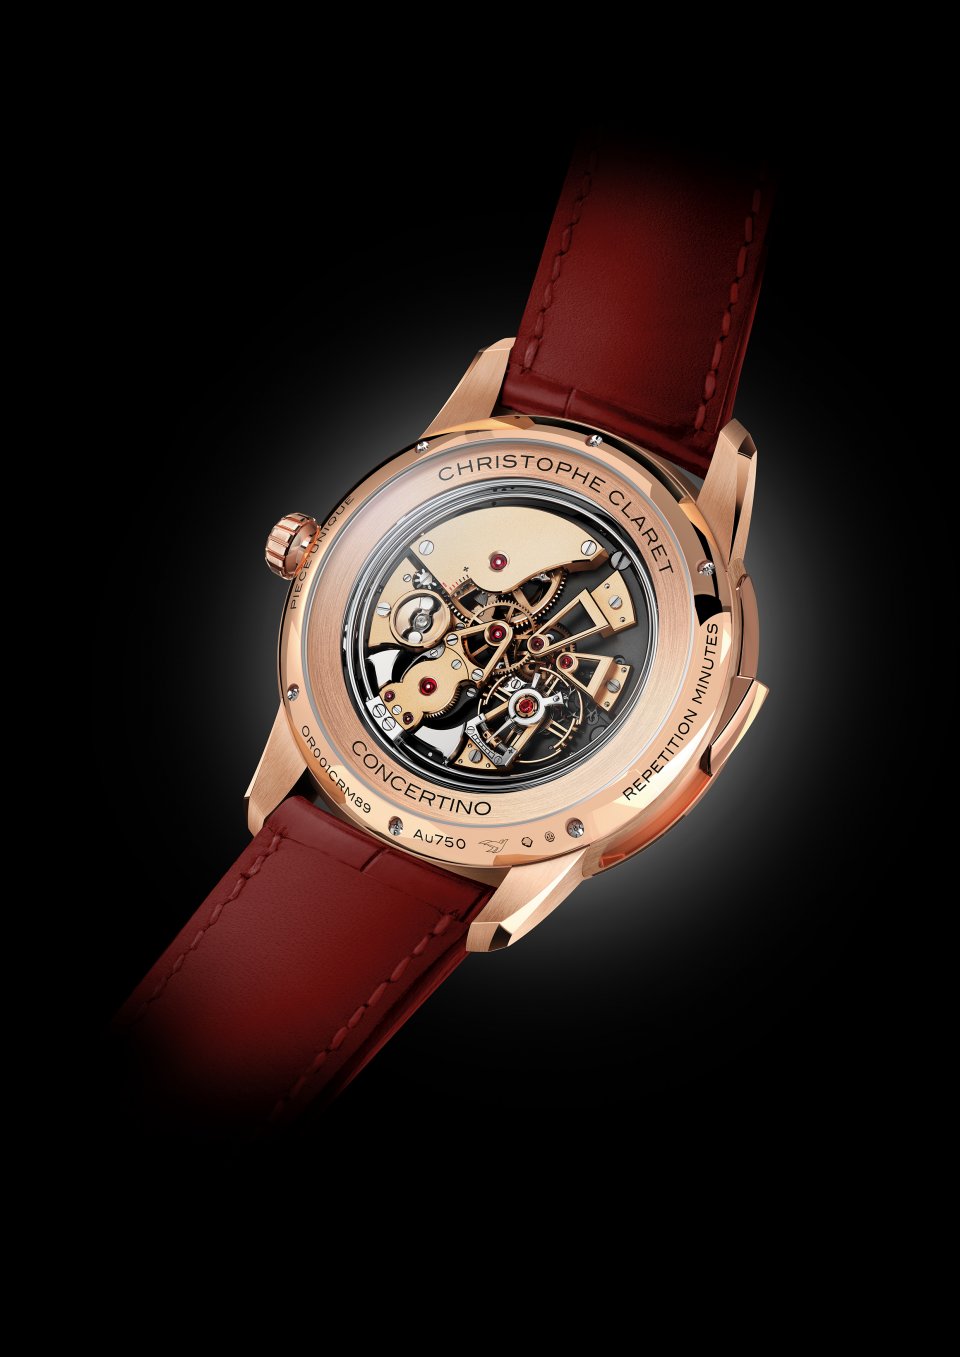 Concertino Dragon, a new striking timepiece from Christophe Claret